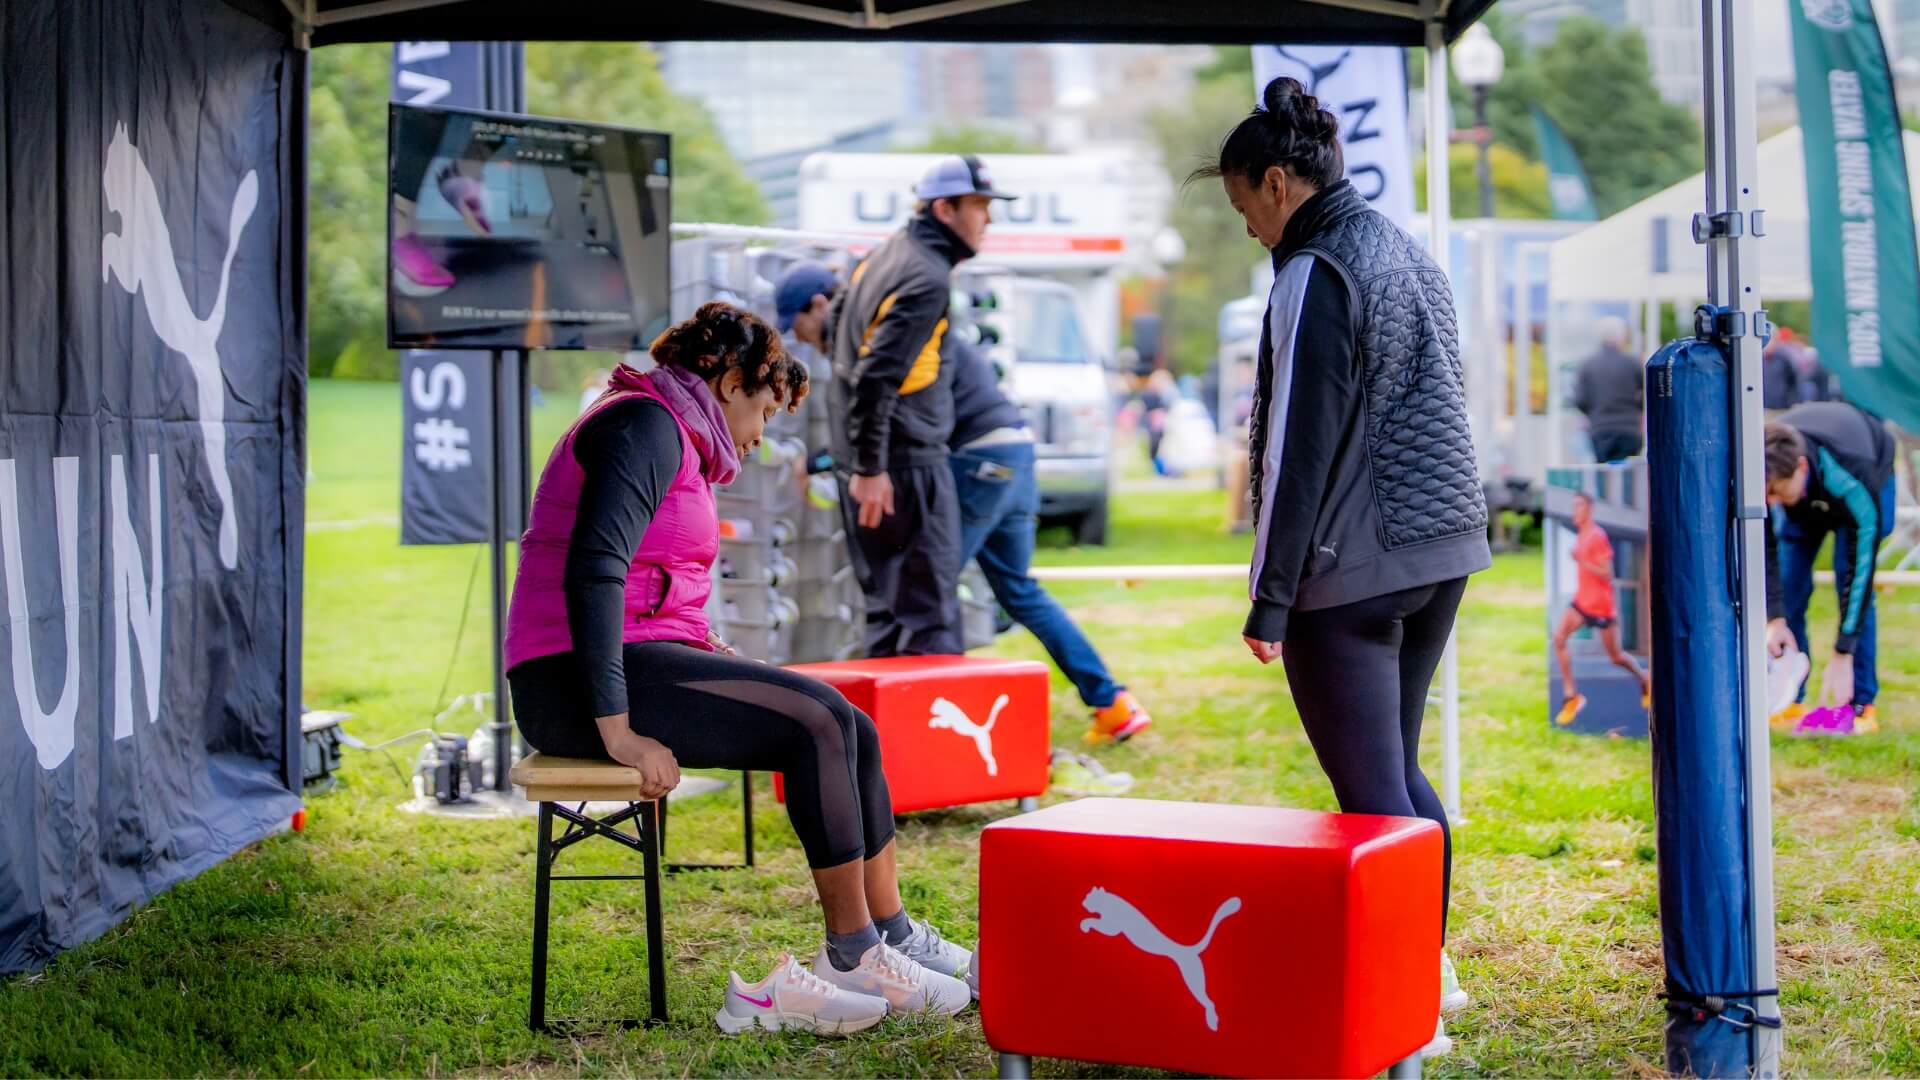 At the 10k Puma Marathon for Women in Boston, women were able to use the small beer bench to try on a wide variety of shoes.